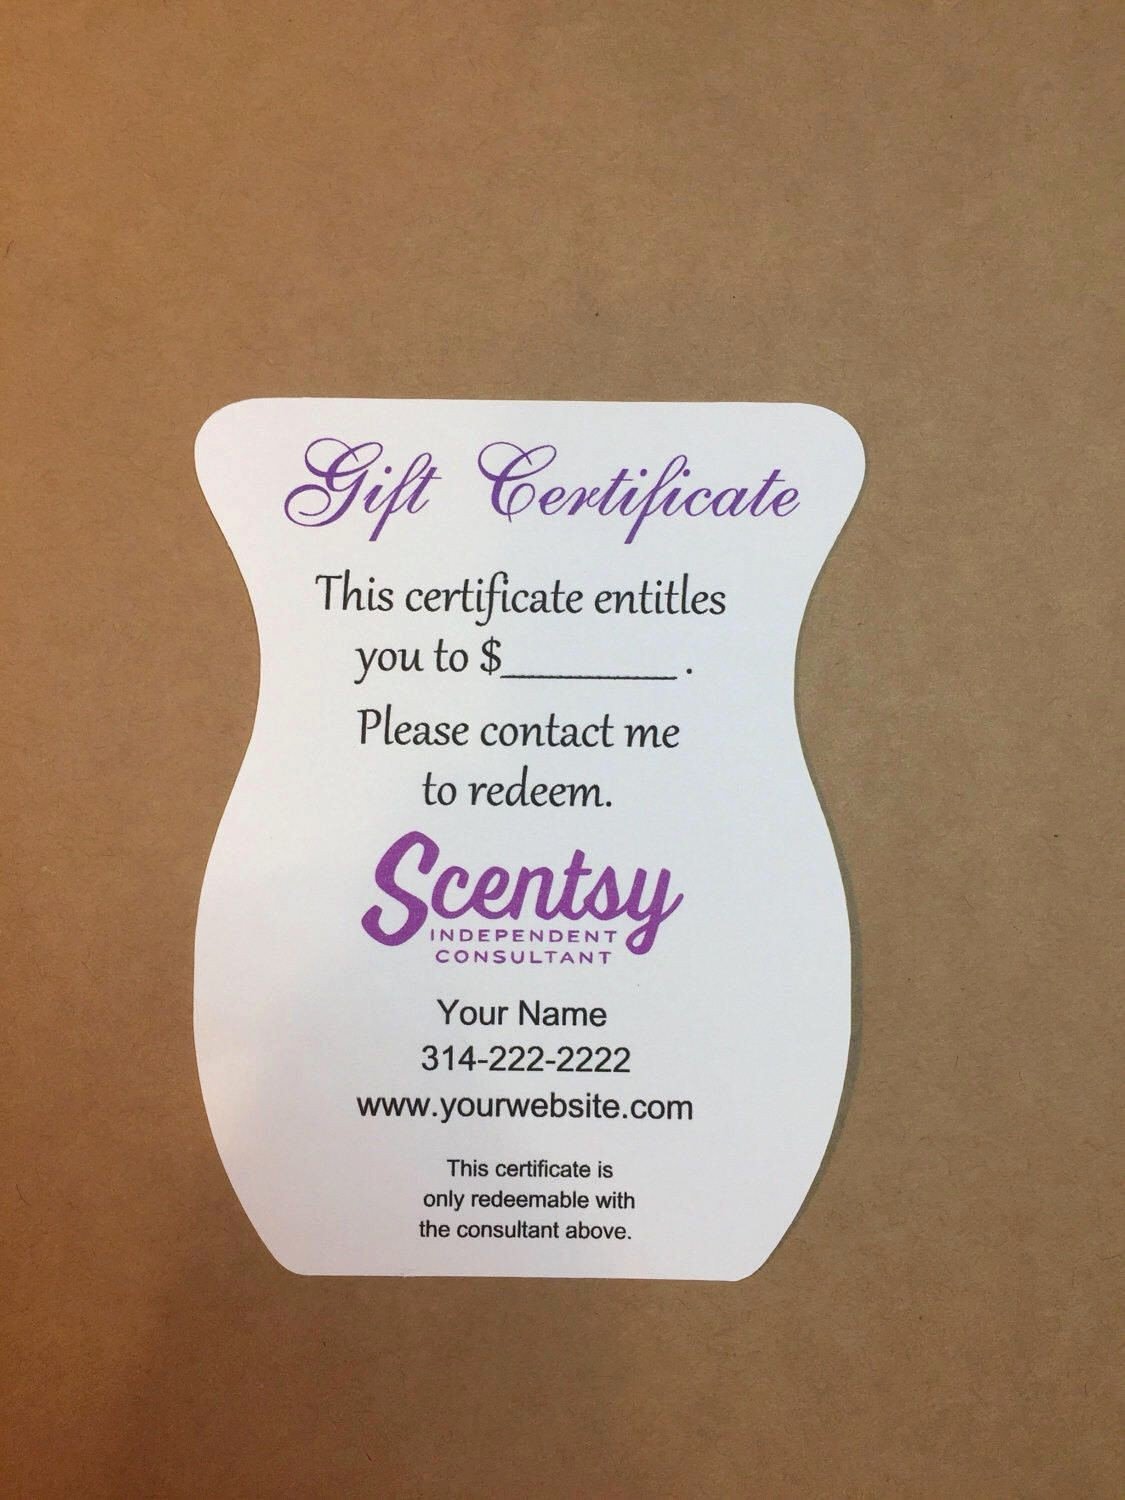 Scentsy Gift Certificate Elegant Magnificent Custom Gift